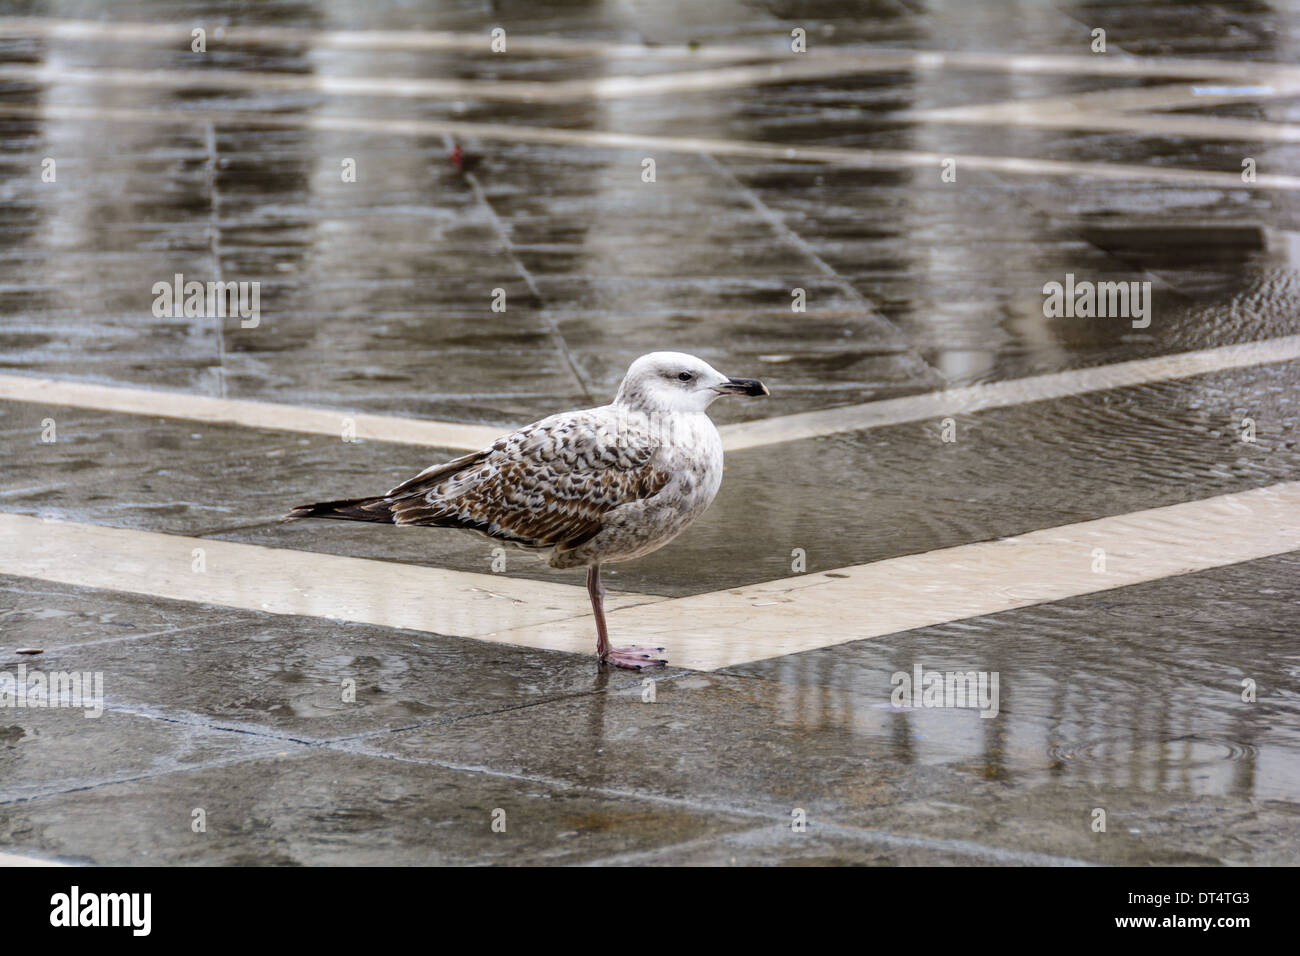 Venice, Italy. Juvenile seagull standing on one leg in the rain on St Mark´s Square, Piazza San Marco. Stock Photo